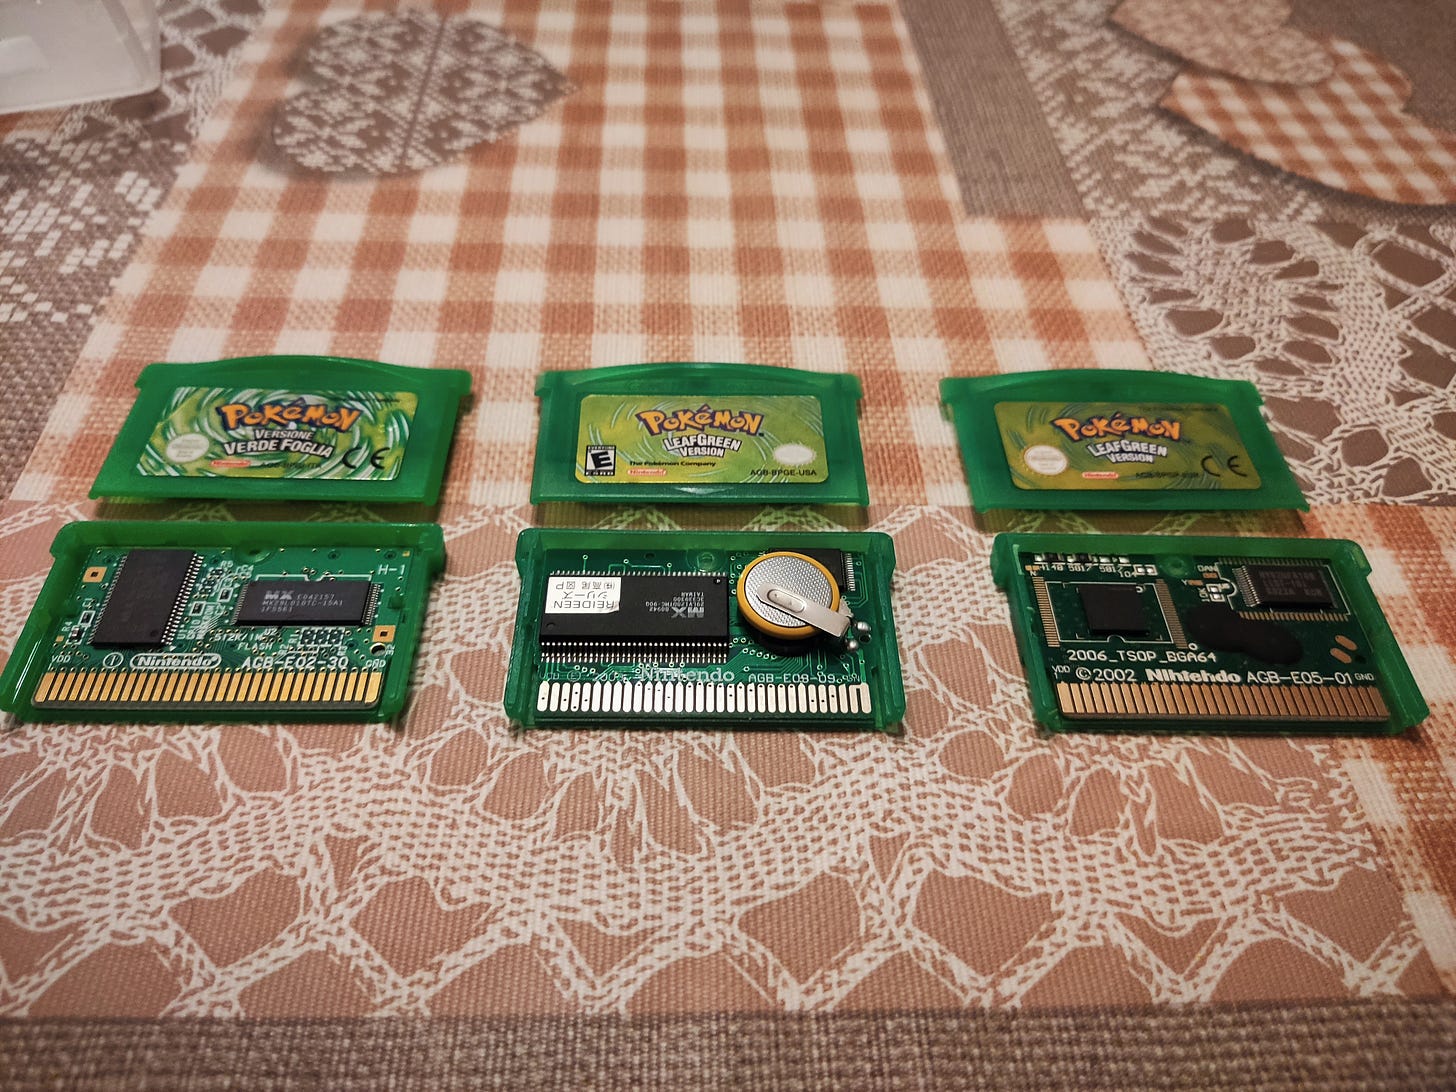 Copies of Pokémon LeafGreen. Left side is a genuine Italian copy, centre is a reproduction, right side is a reproduction (Photo credit: Lucent)